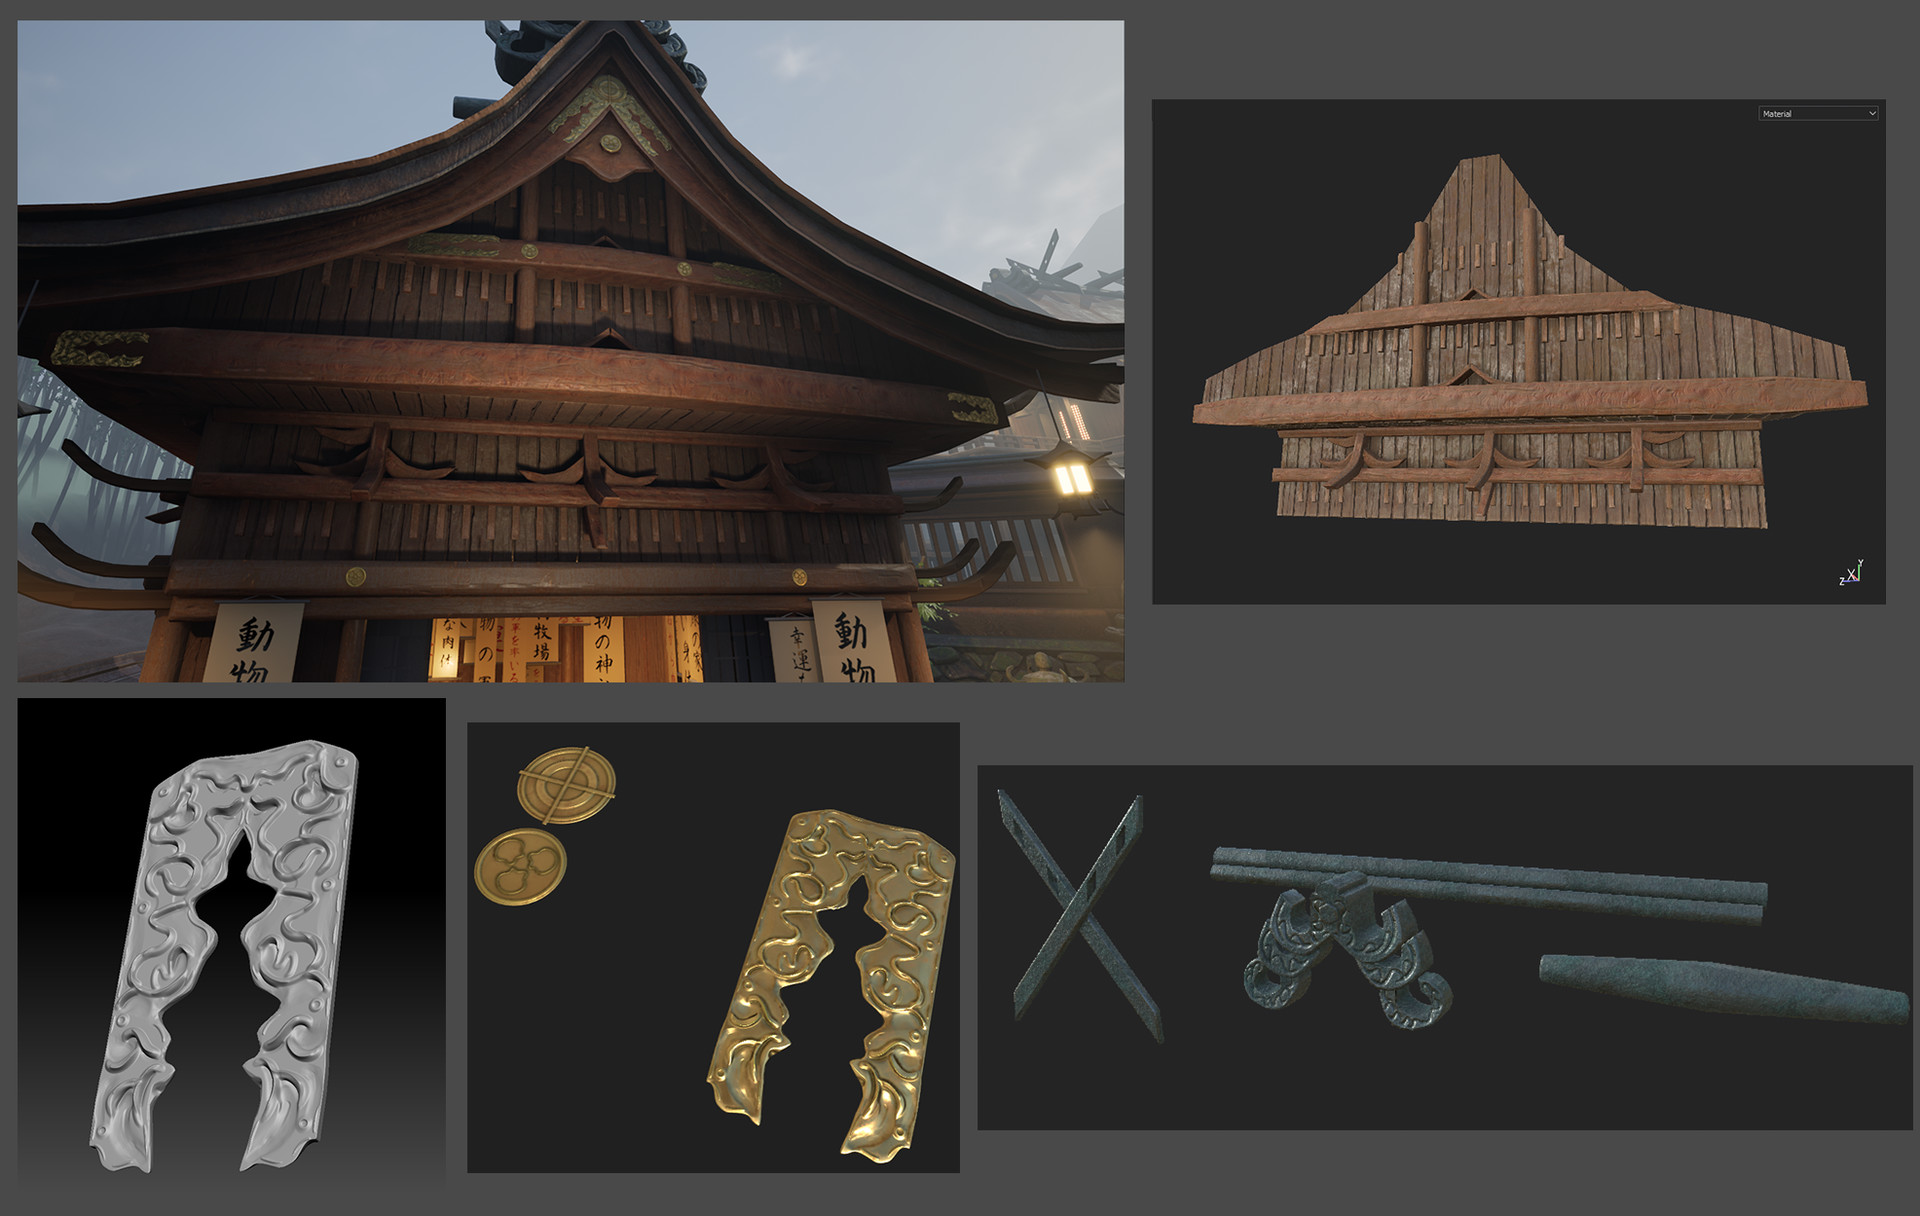 5 screenshots put into one. First one is lower angle UE4 view of the front of the calligraphers hut. It’s lit in a dramatic spotlight in white tint. Second is a Substance Painter screenshot of that same frontal piece used on the hut. Next is a Zbrush sculpt of a golden ornament. It’s followed by a Substance Designer screenshot of that 3D ornament baked onto flat, 2D texture and now properly colored in PBR gold. Last screenshot is the roof pieces in oxidized textures.